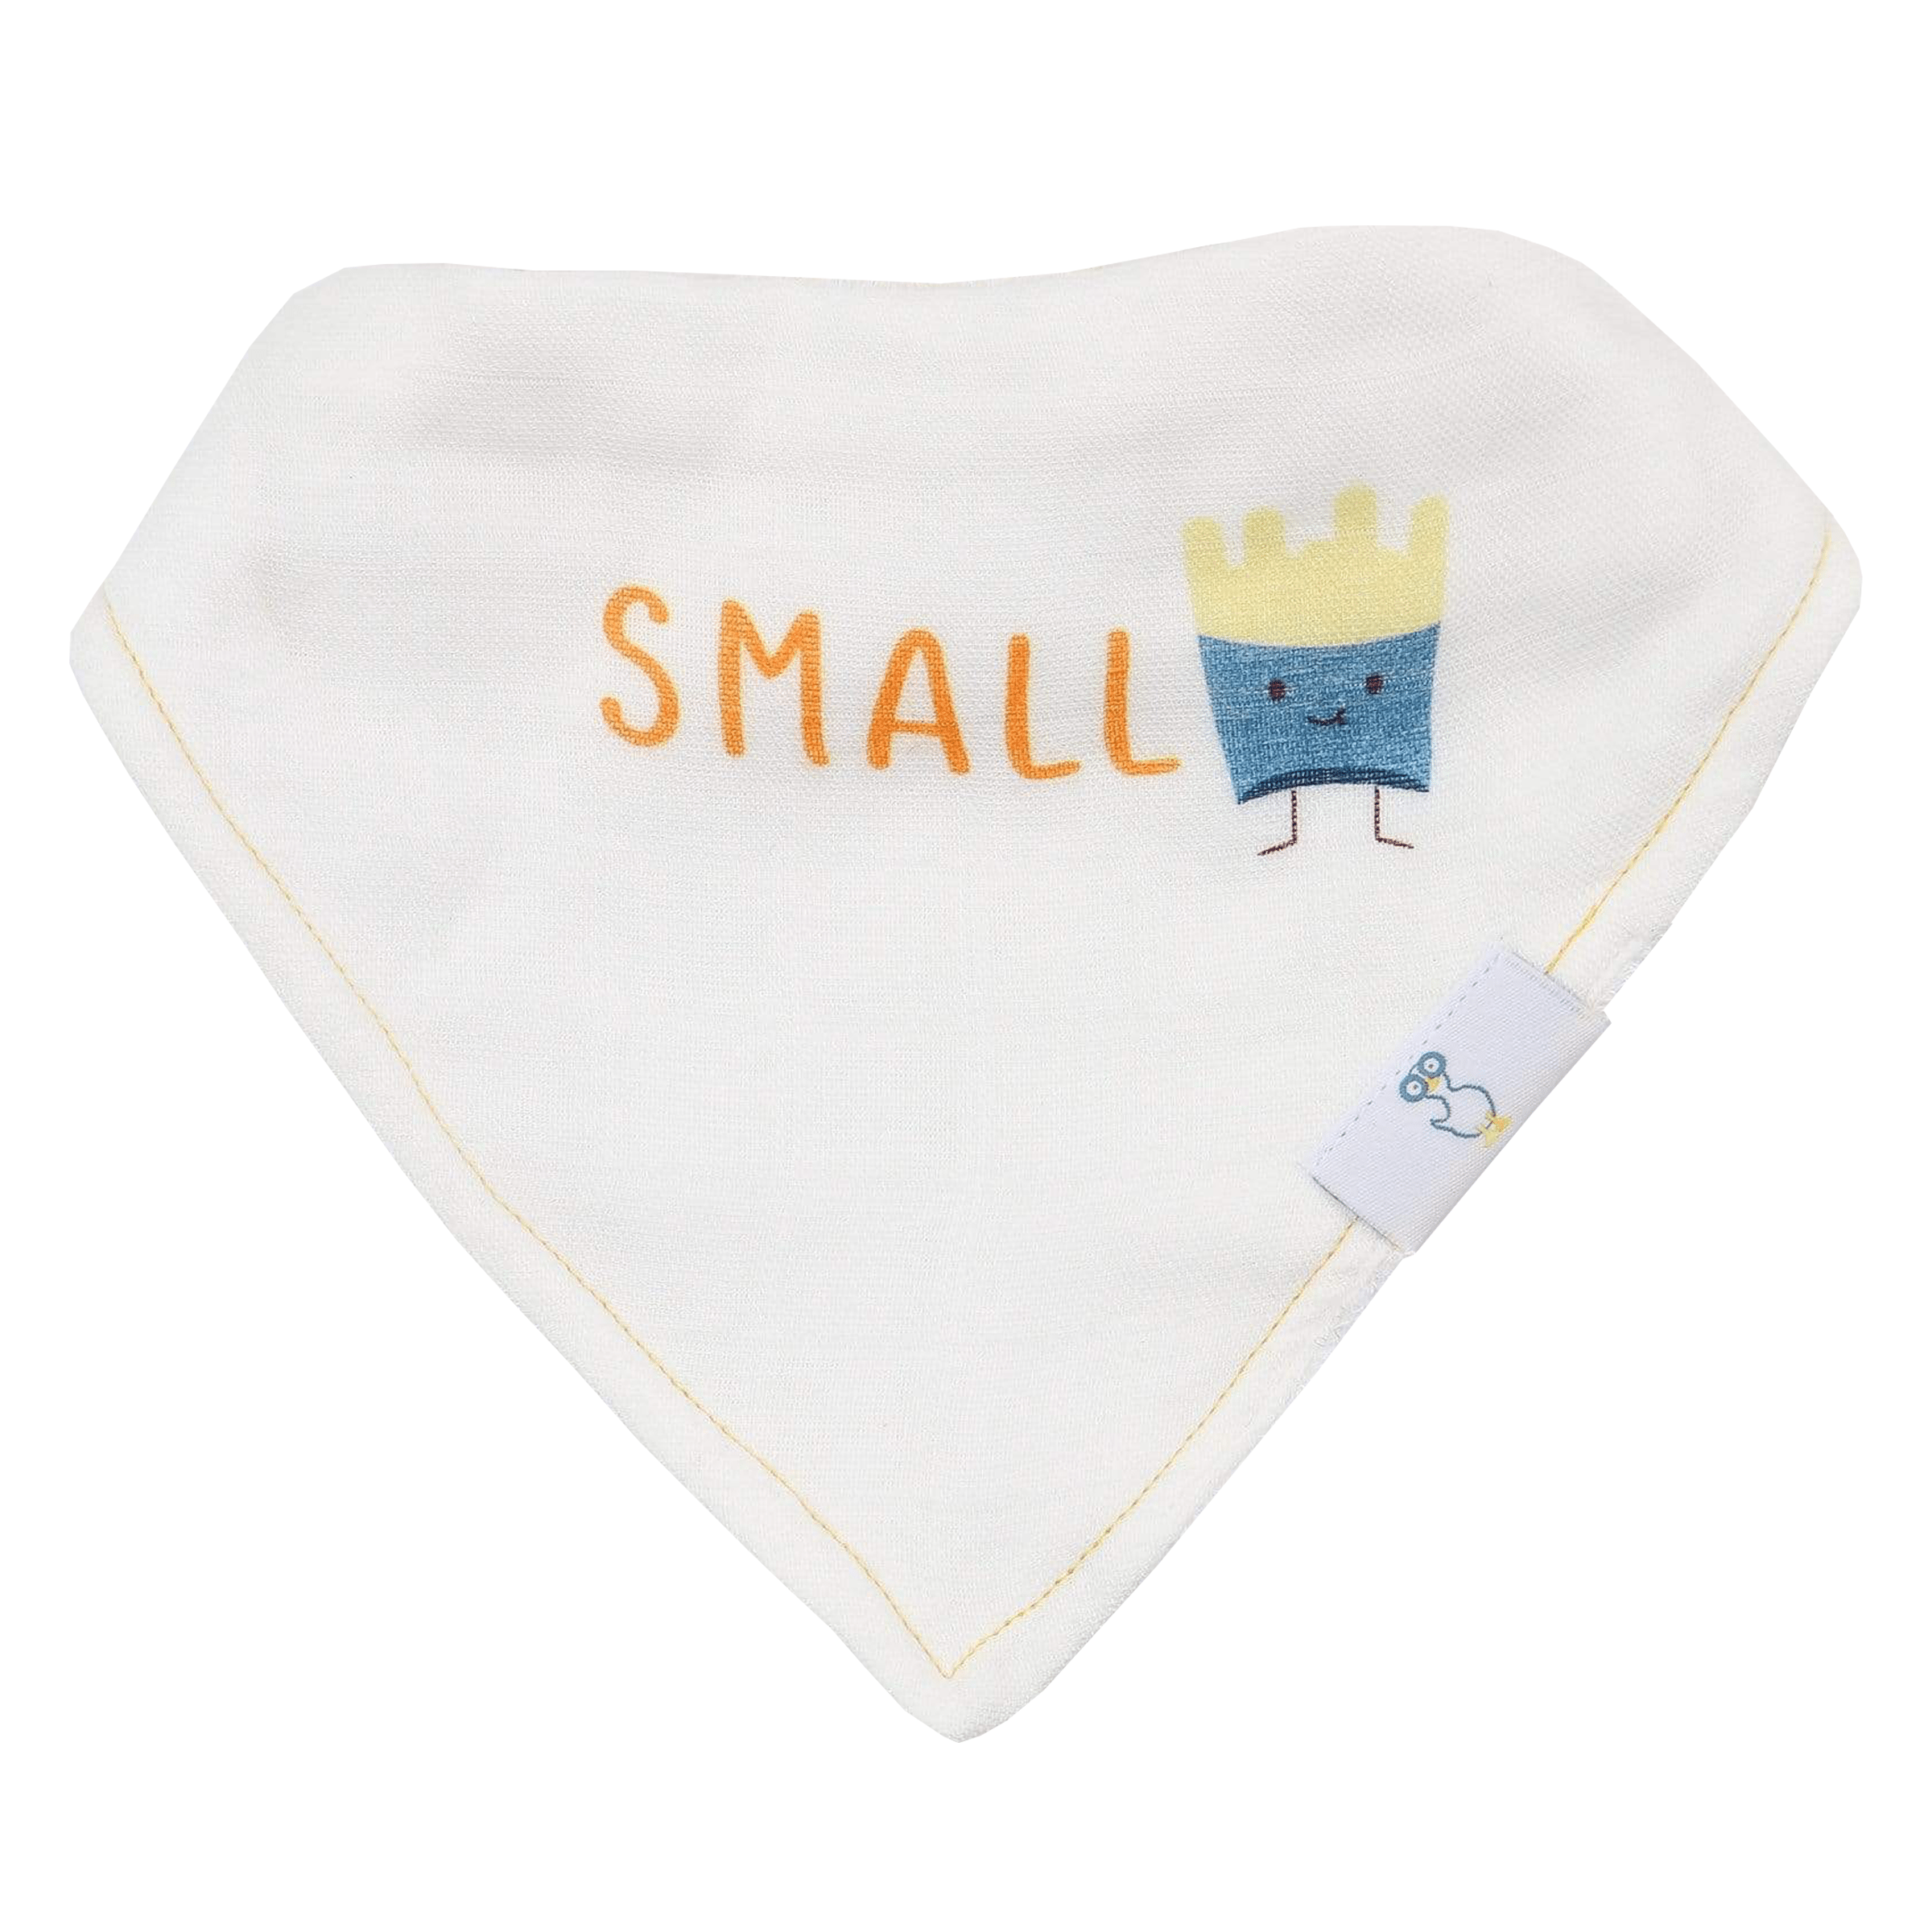 Small Fry And Burgers And Fries 2 Pack Muslin & Terry Cloth Bib Set